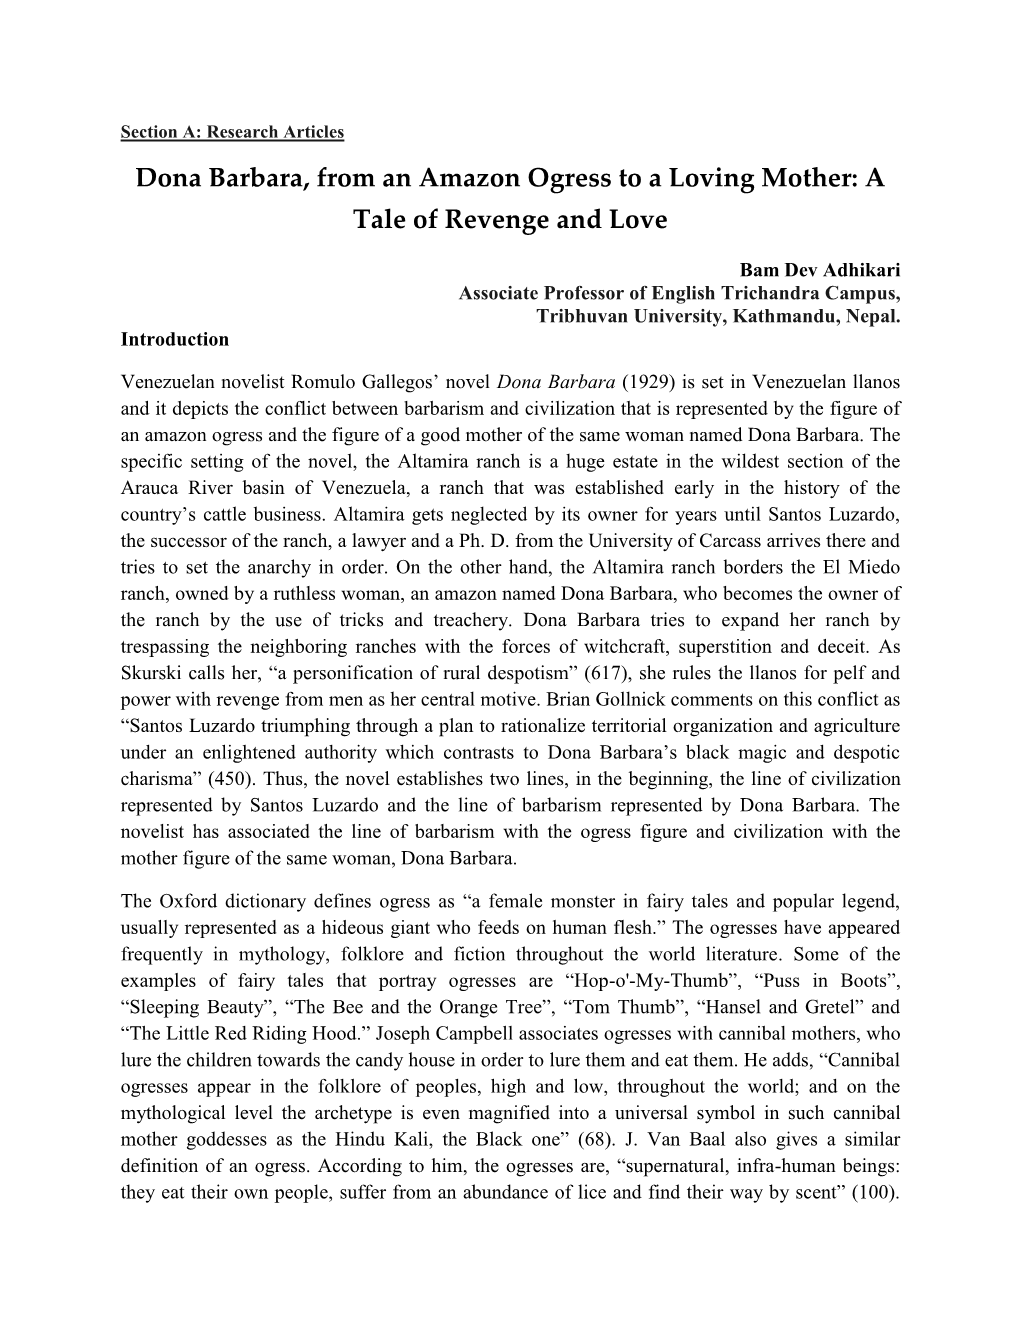 Dona Barbara, from an Amazon Ogress to a Loving Mother: a Tale of Revenge and Love